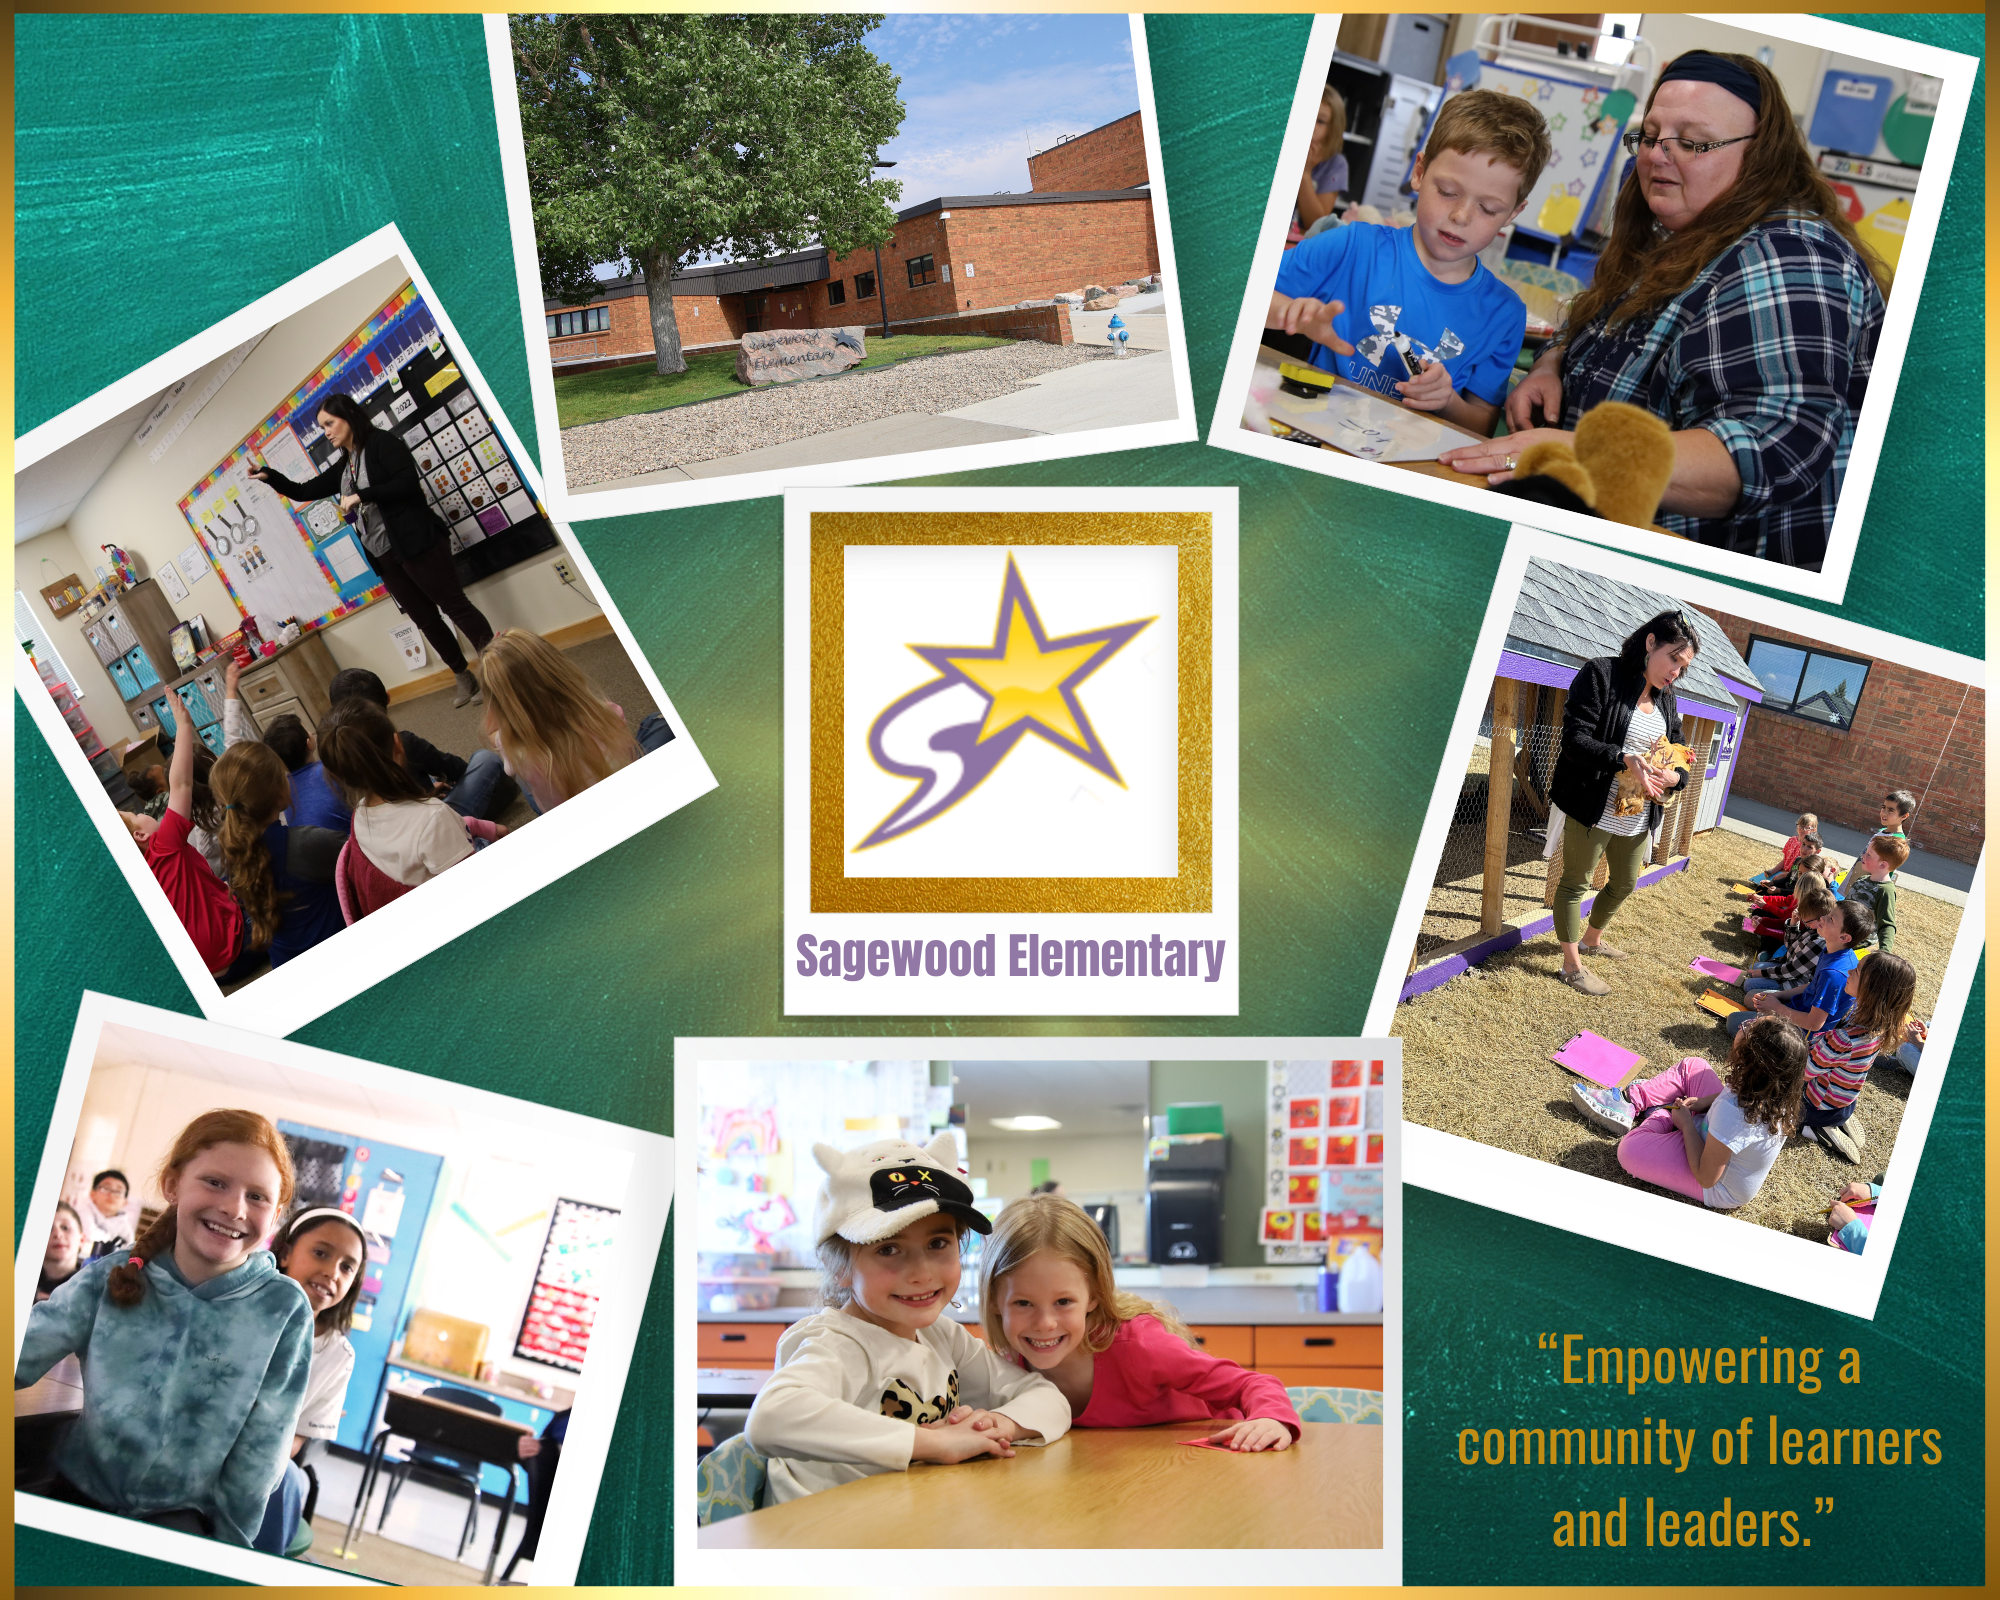 Collage of 7 photos of Sagewood elementary school, students and teachers in classrooms, students smiling at the camera, students outside learning by the Sagewood chicken coop, and the Sagewood Elementary star logo, and the text "Empowering a Community of Leaders and Learners"